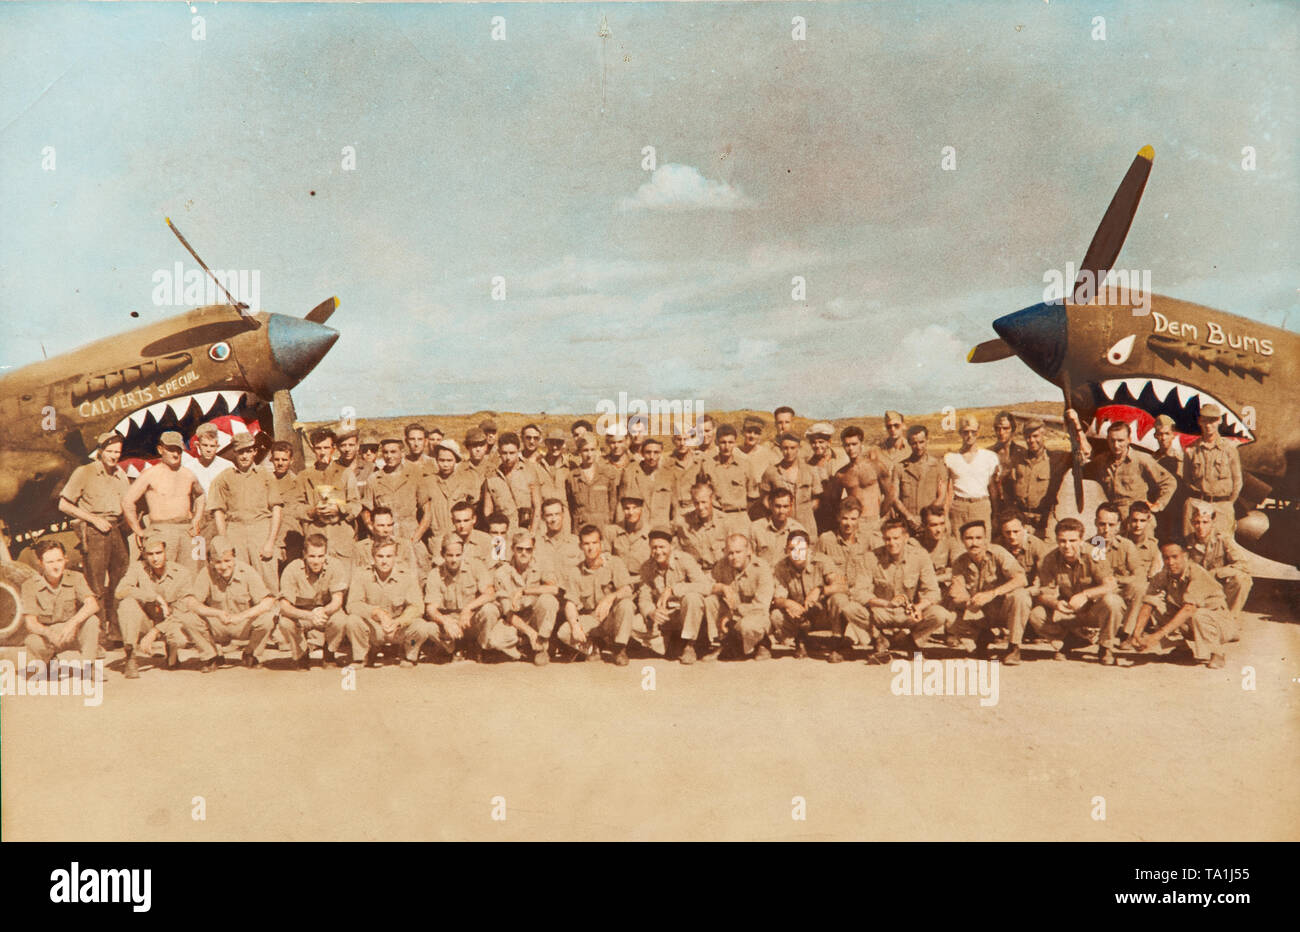 (190521) -- NEW YORK, May 21, 2019 (Xinhua) -- Members of the 76th Squadron of the 23rd Fighter Group of the 14th U.S. Air Force, in which Flying Tiger pilot Glen Beneda served as a pilot, pose for photos in front of two shark-teeth fighter planes in China during the World War II. The sacrifices Chinese and Americans made side by side in the war are our common heritage which should be cherished by our two countries, said Edward Beneda, vice chairman of the Sino-American Aviation Heritage Foundation (SAAHF) and son of U.S. Flying Tigers pilot Glen Beneda, 'We disagree from time to time, but the Stock Photo